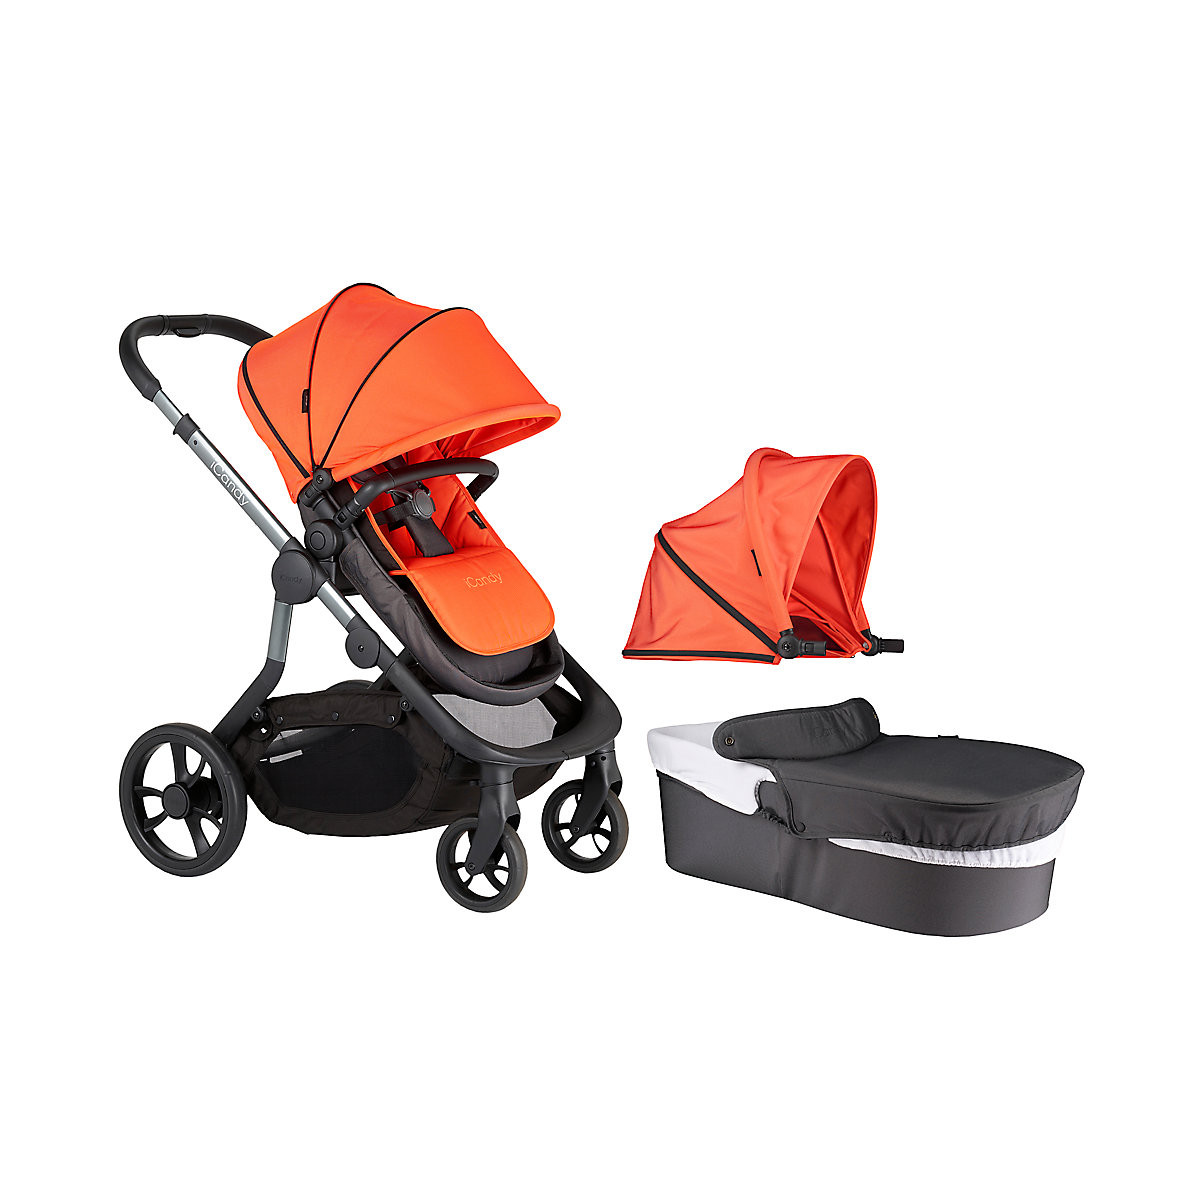 icandy travel system reviews